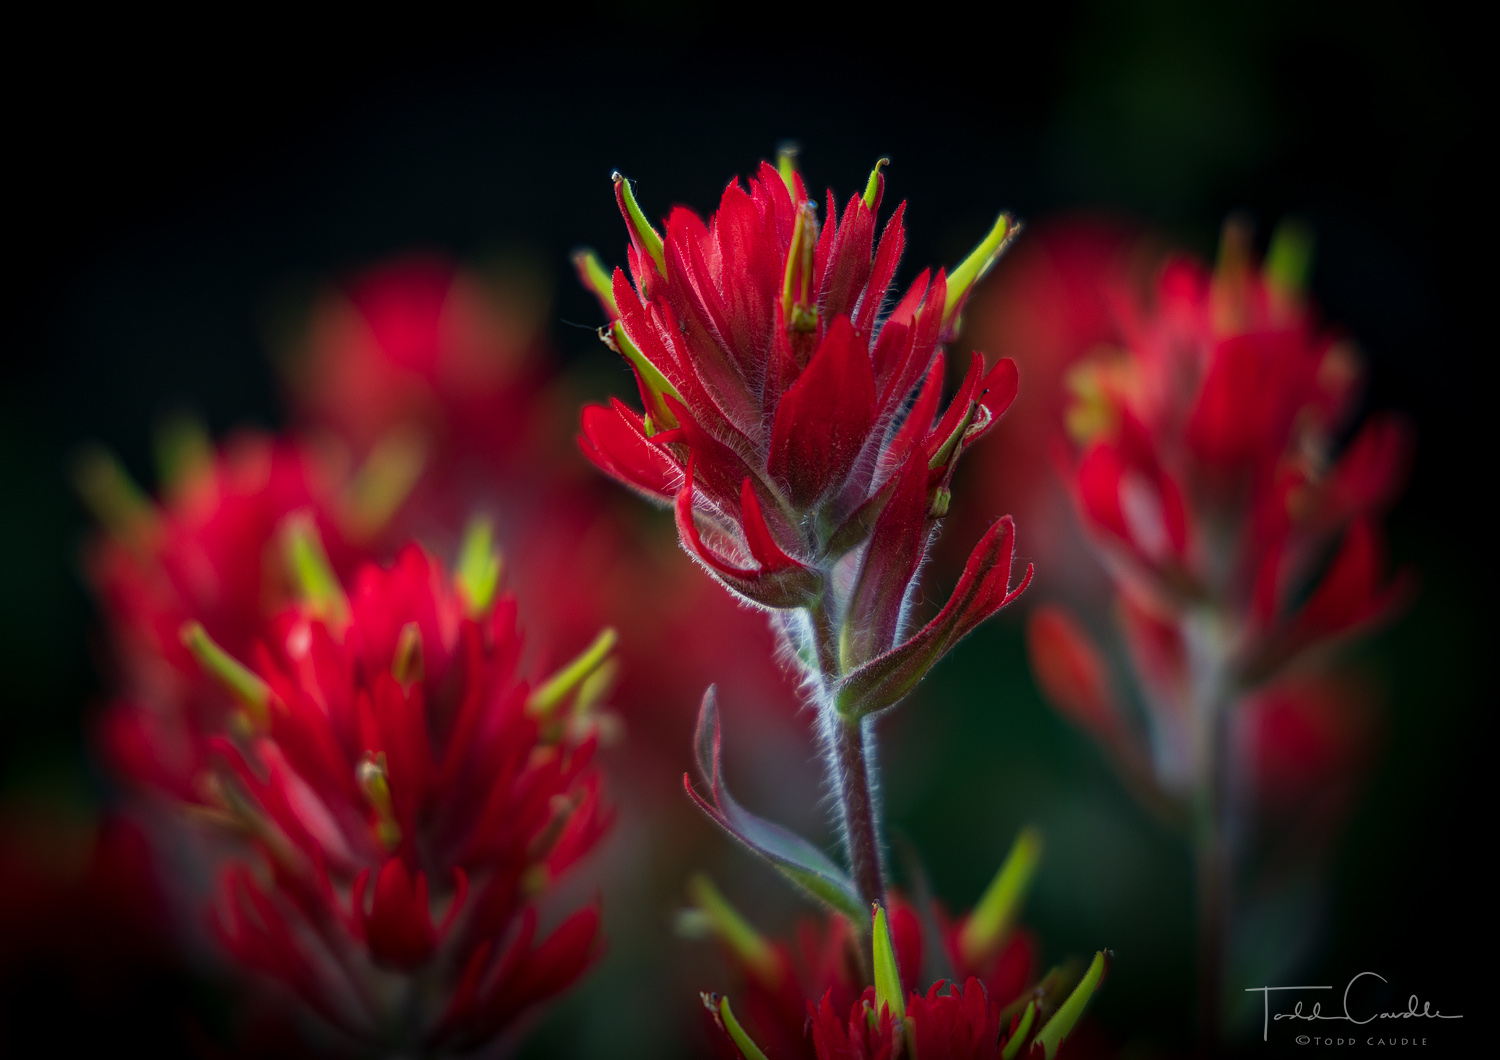 A delicate bouquet of red Indian paintbrush beside our campsite in the Weminuche.